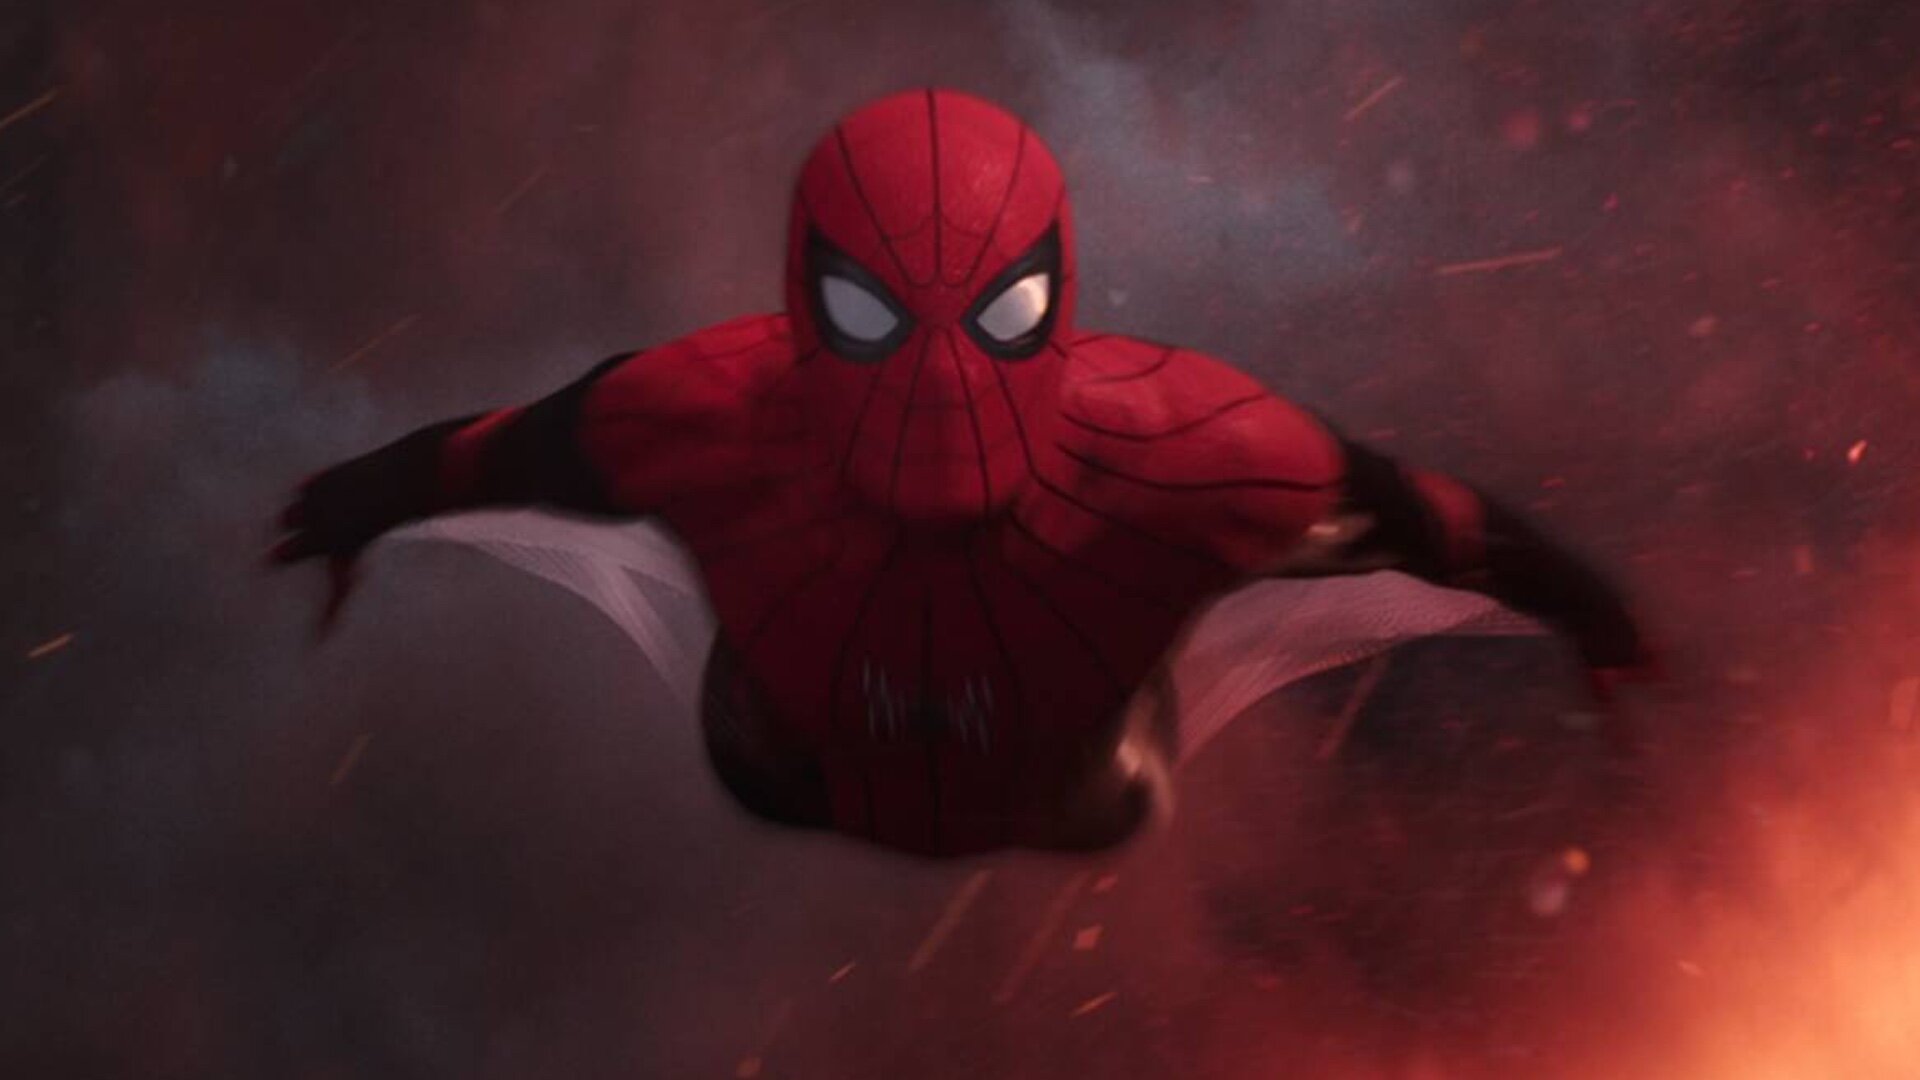 Marvel's Spider-Man: No Way Home trailer teases the Sinister Six